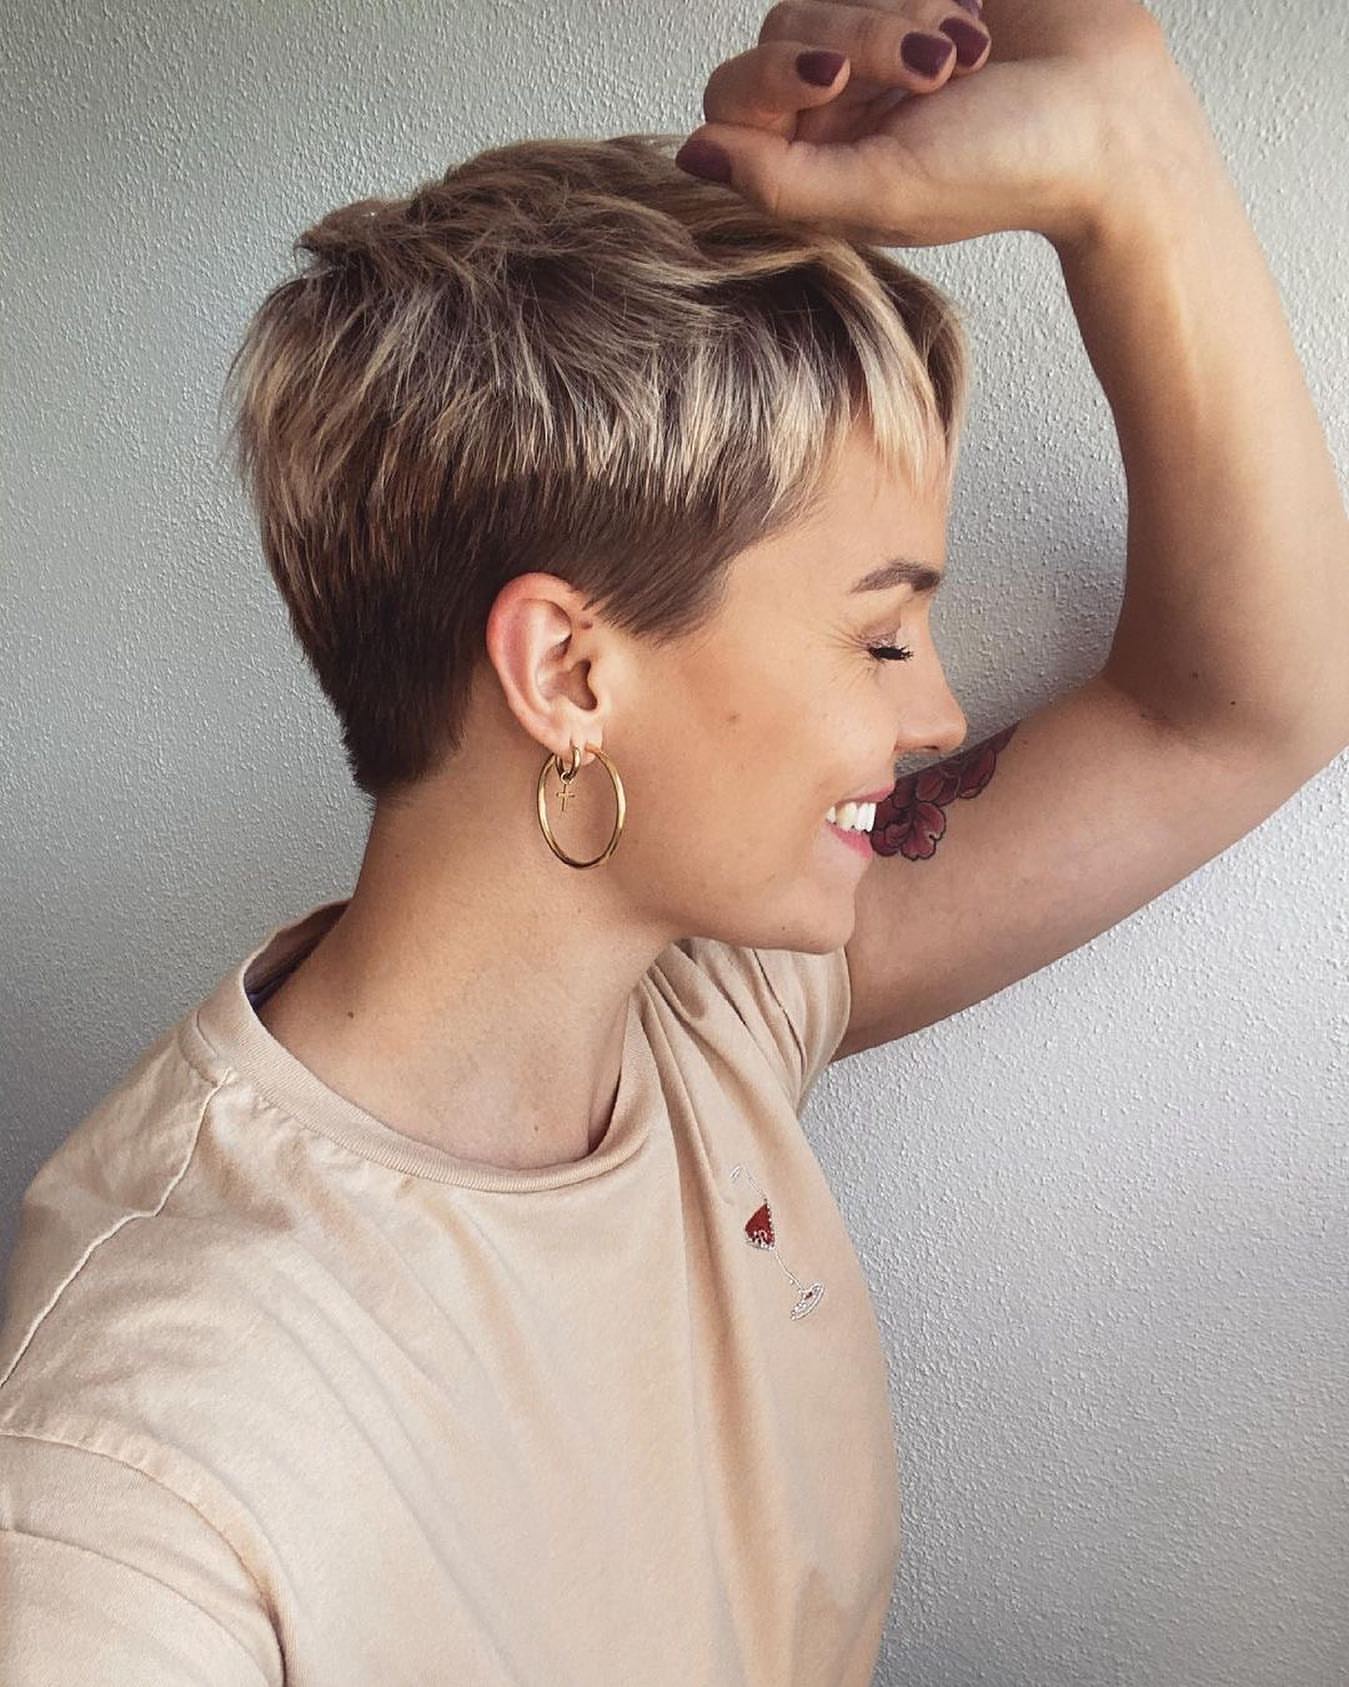 Short Hairstyles for Women Natural Personal Wavy Synthetic Wigs Ith Bangs  for Black Women Short Pixie Cut Curly Hair Wigs 10 Styles Available |  Walmart Canada